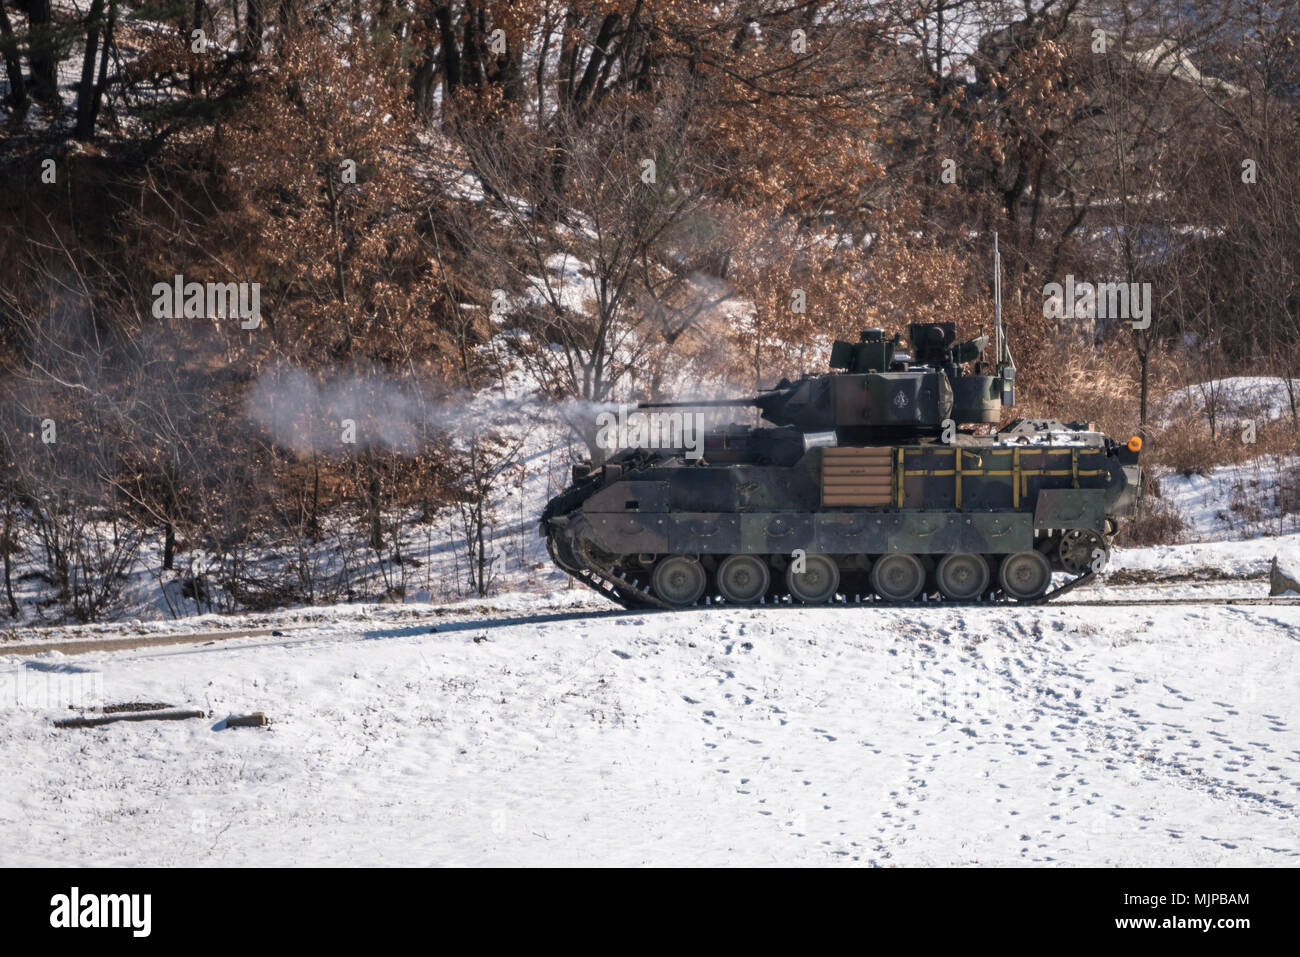 RODRIGUEZ LIVE FIRE COMPLEX, Republic of Korea – A M2A3 Bradley Fighting Vehicle (BFV) from Company A, 4th Squadron, 9th Cavalry Regiment, 2nd Armored Brigade Combat Team, 1st Cavalry Division fires its main 25mm weapon during Gunnery Qualification Table VI on December 13, 2017. Gunnery Qualification Table VI helps the Bradley crews hone their skills as a team and prepare them for further gunnery qualification tables to come. 4-9 Cav. is part of the 2nd Infantry Division’s armored brigade combat team currently stationed in South Korea on a 9-month rotation. Stock Photo